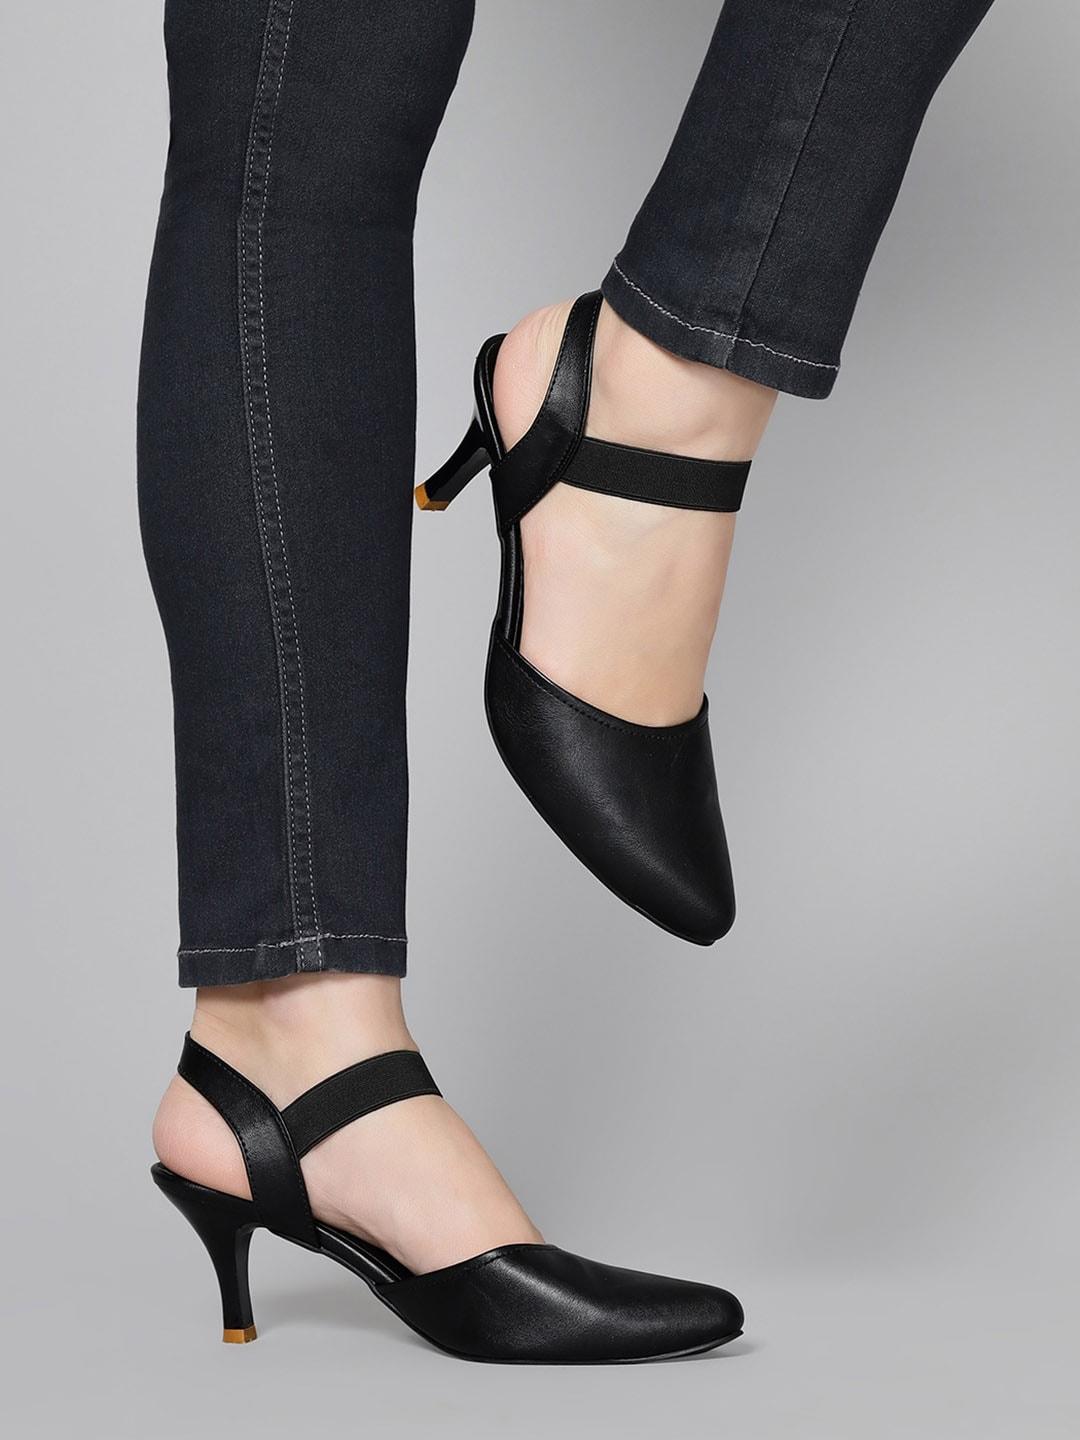 T.ELEVEN Pointed Toe Slim Heeled Pumps